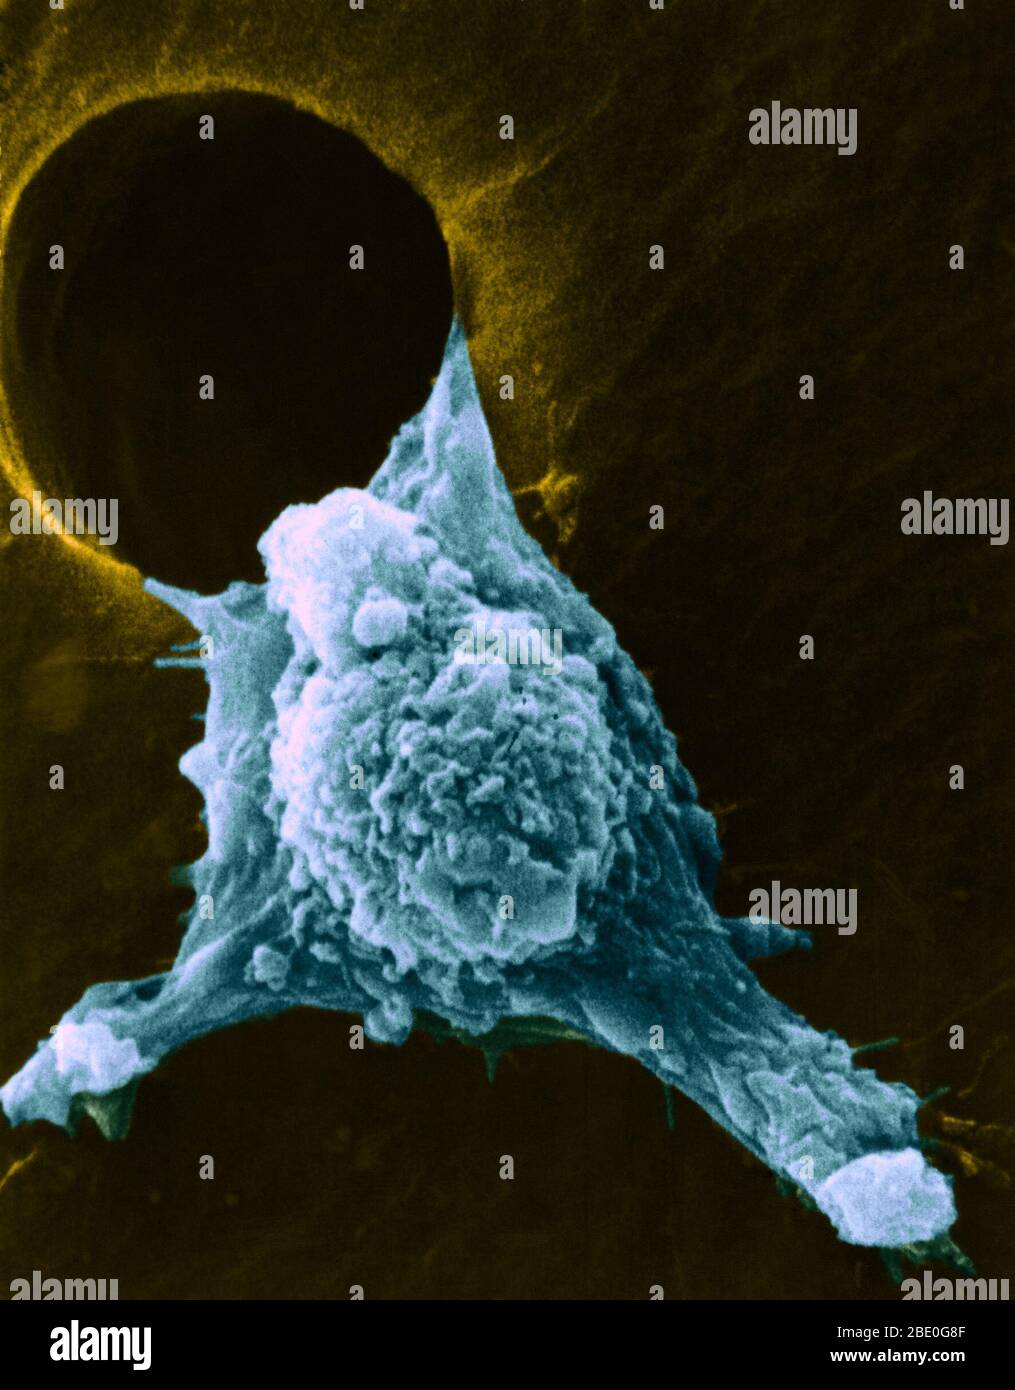 Migrating cancer cell. Colored scanning electron micrograph (SEM) of a cultured cancer cell moving (metastasizing) through a hole in a support film. Numerous pseudopodia (arm-like), fillipodia (thread-like) and surface blebs (lumps) can be seen. These features are characteristic of highly mobile cells, and enable cancerous cells to spread rapidly around the body, and invade other organs and tissues (metastasis). Stock Photo